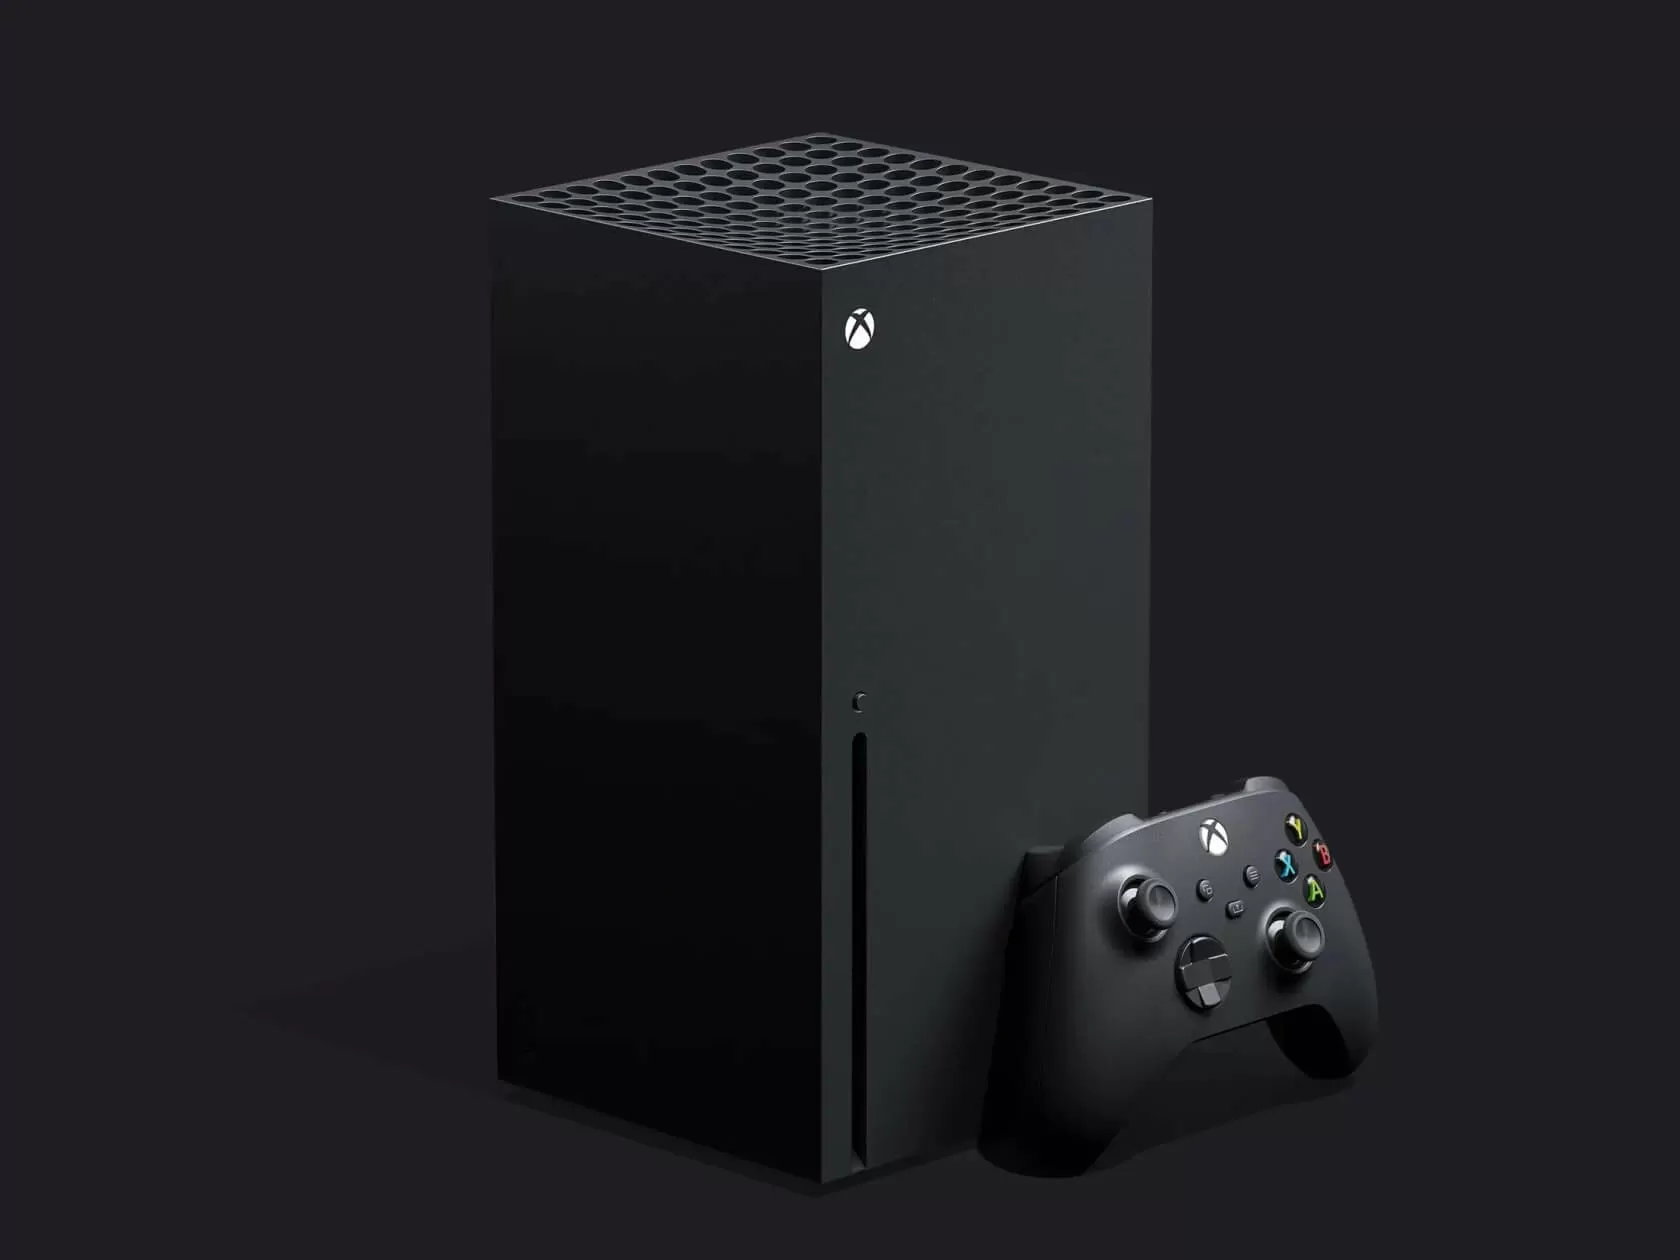 Analyst firm thinks the PS5 and Xbox Series X will be delayed until 2021